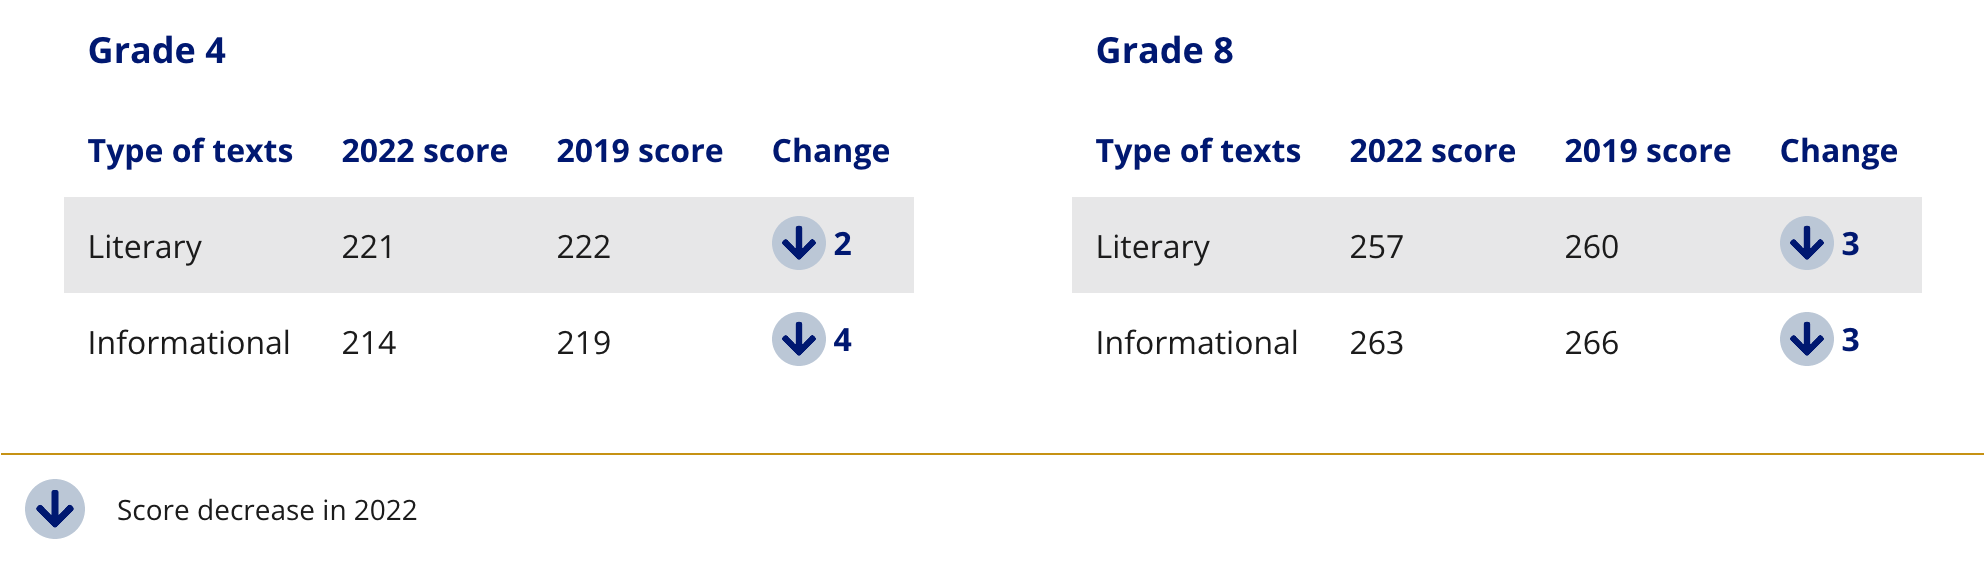 Change in Average Scores Between 2019 and 2022 for Fourth- and Eighth-grade Students in NAEP Reading, by Type of Texts